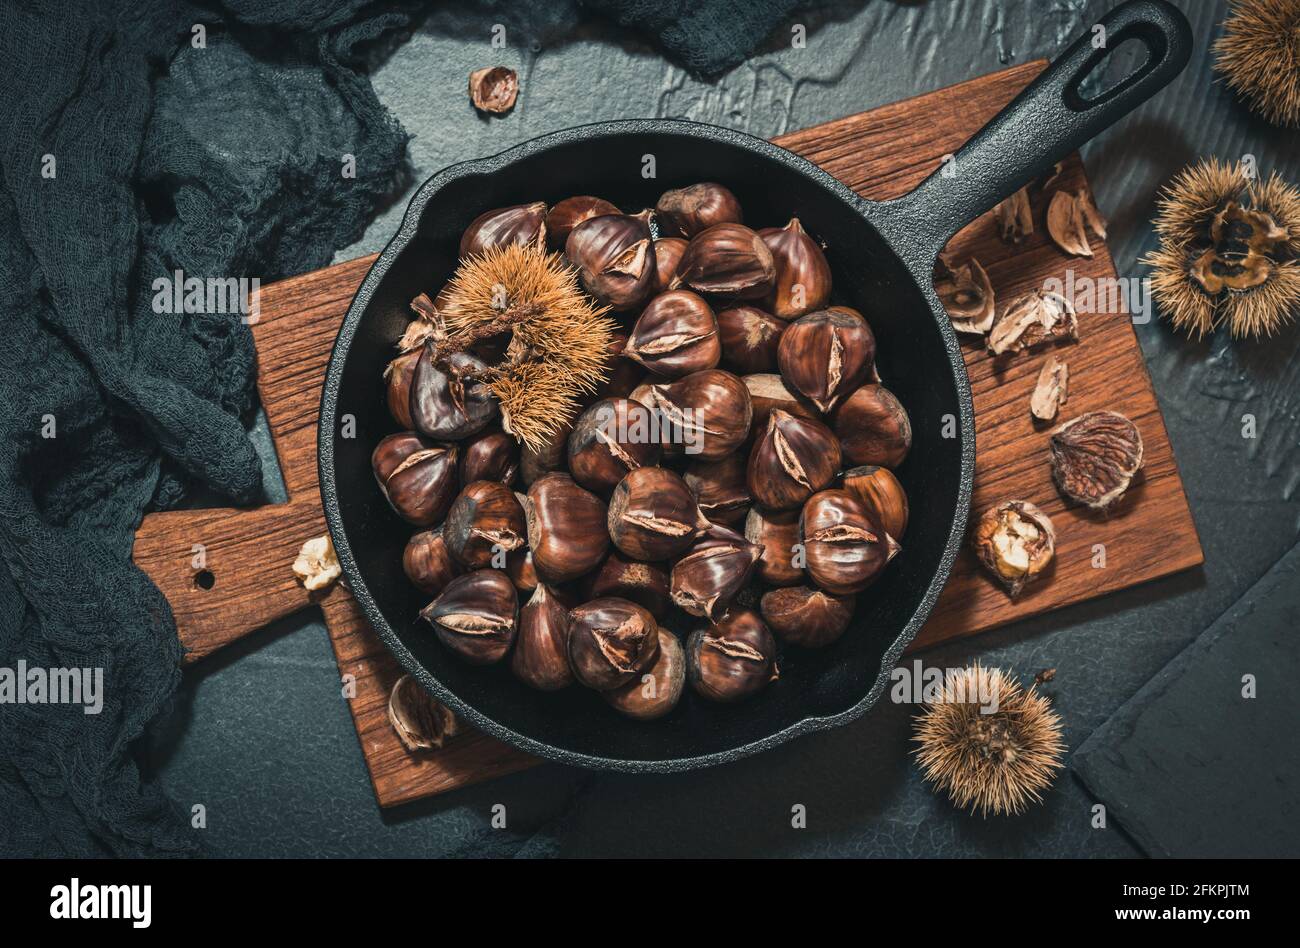 Top view on a cast iron pan with roasted chestnuts on a wooden board on black background Stock Photo